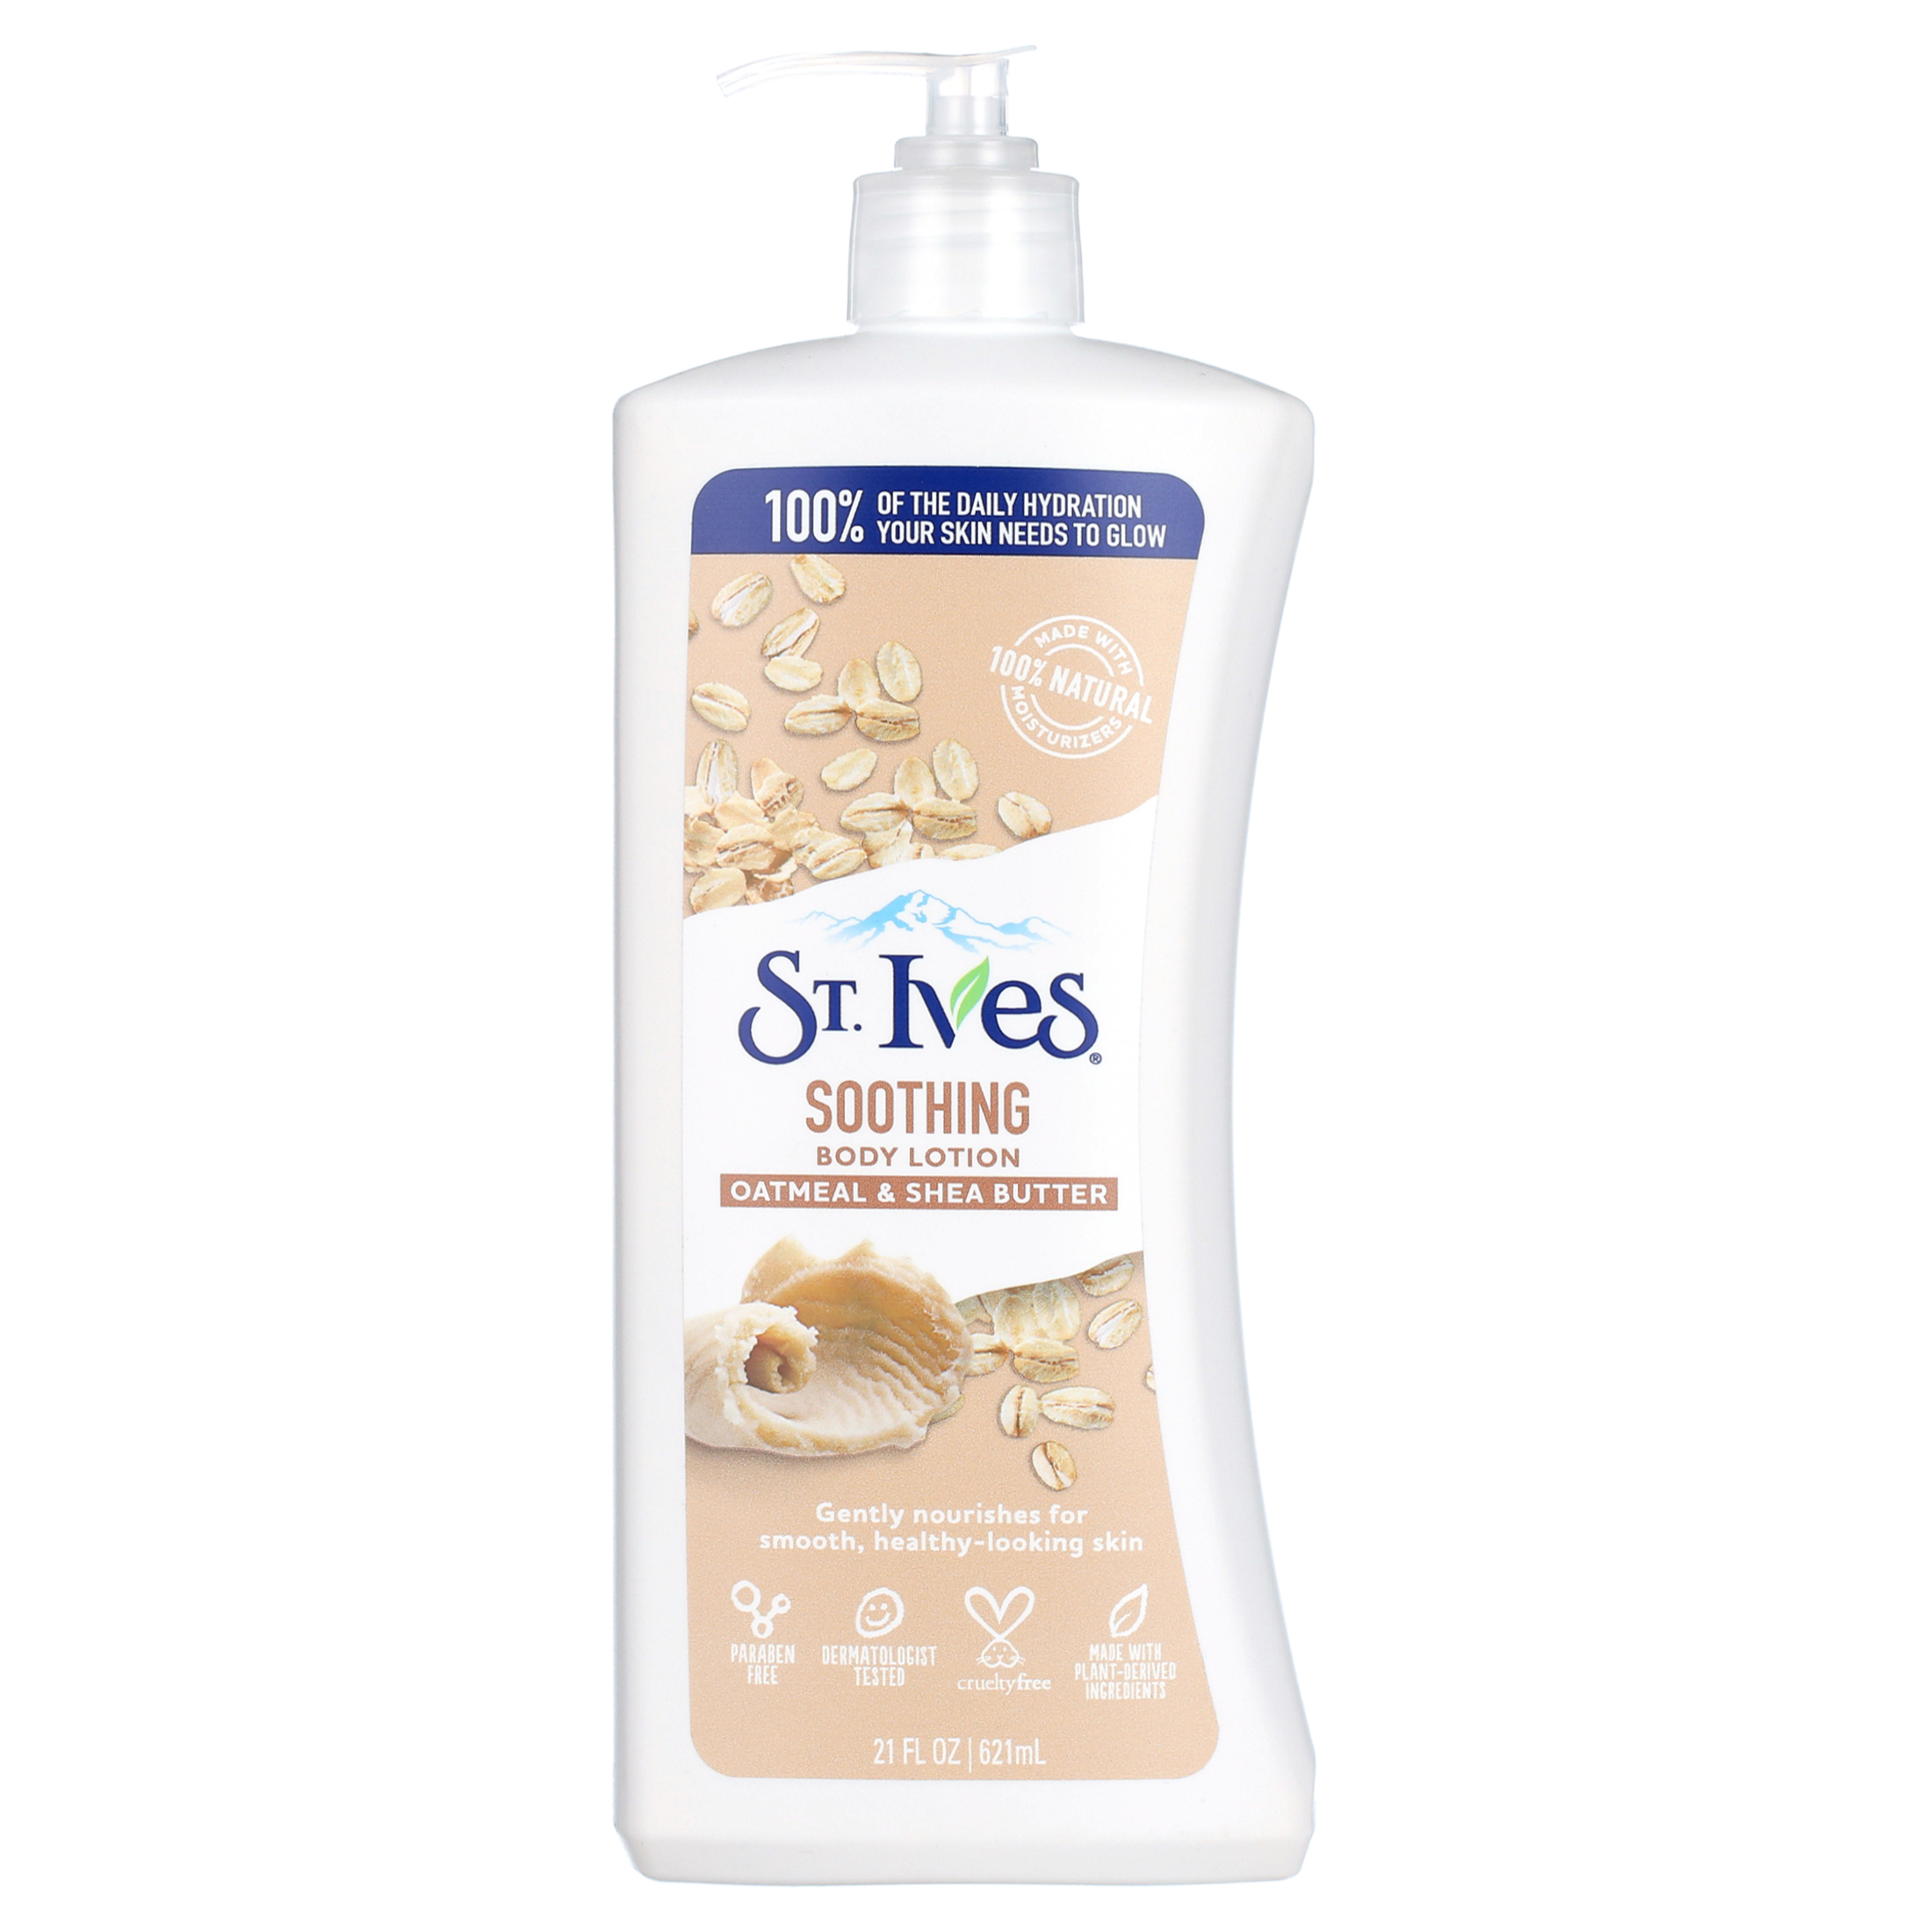 St. Ives Soothing Hand & Body Lotion Oatmeal & Shea Butter 21 fl oz - image 1 of 6